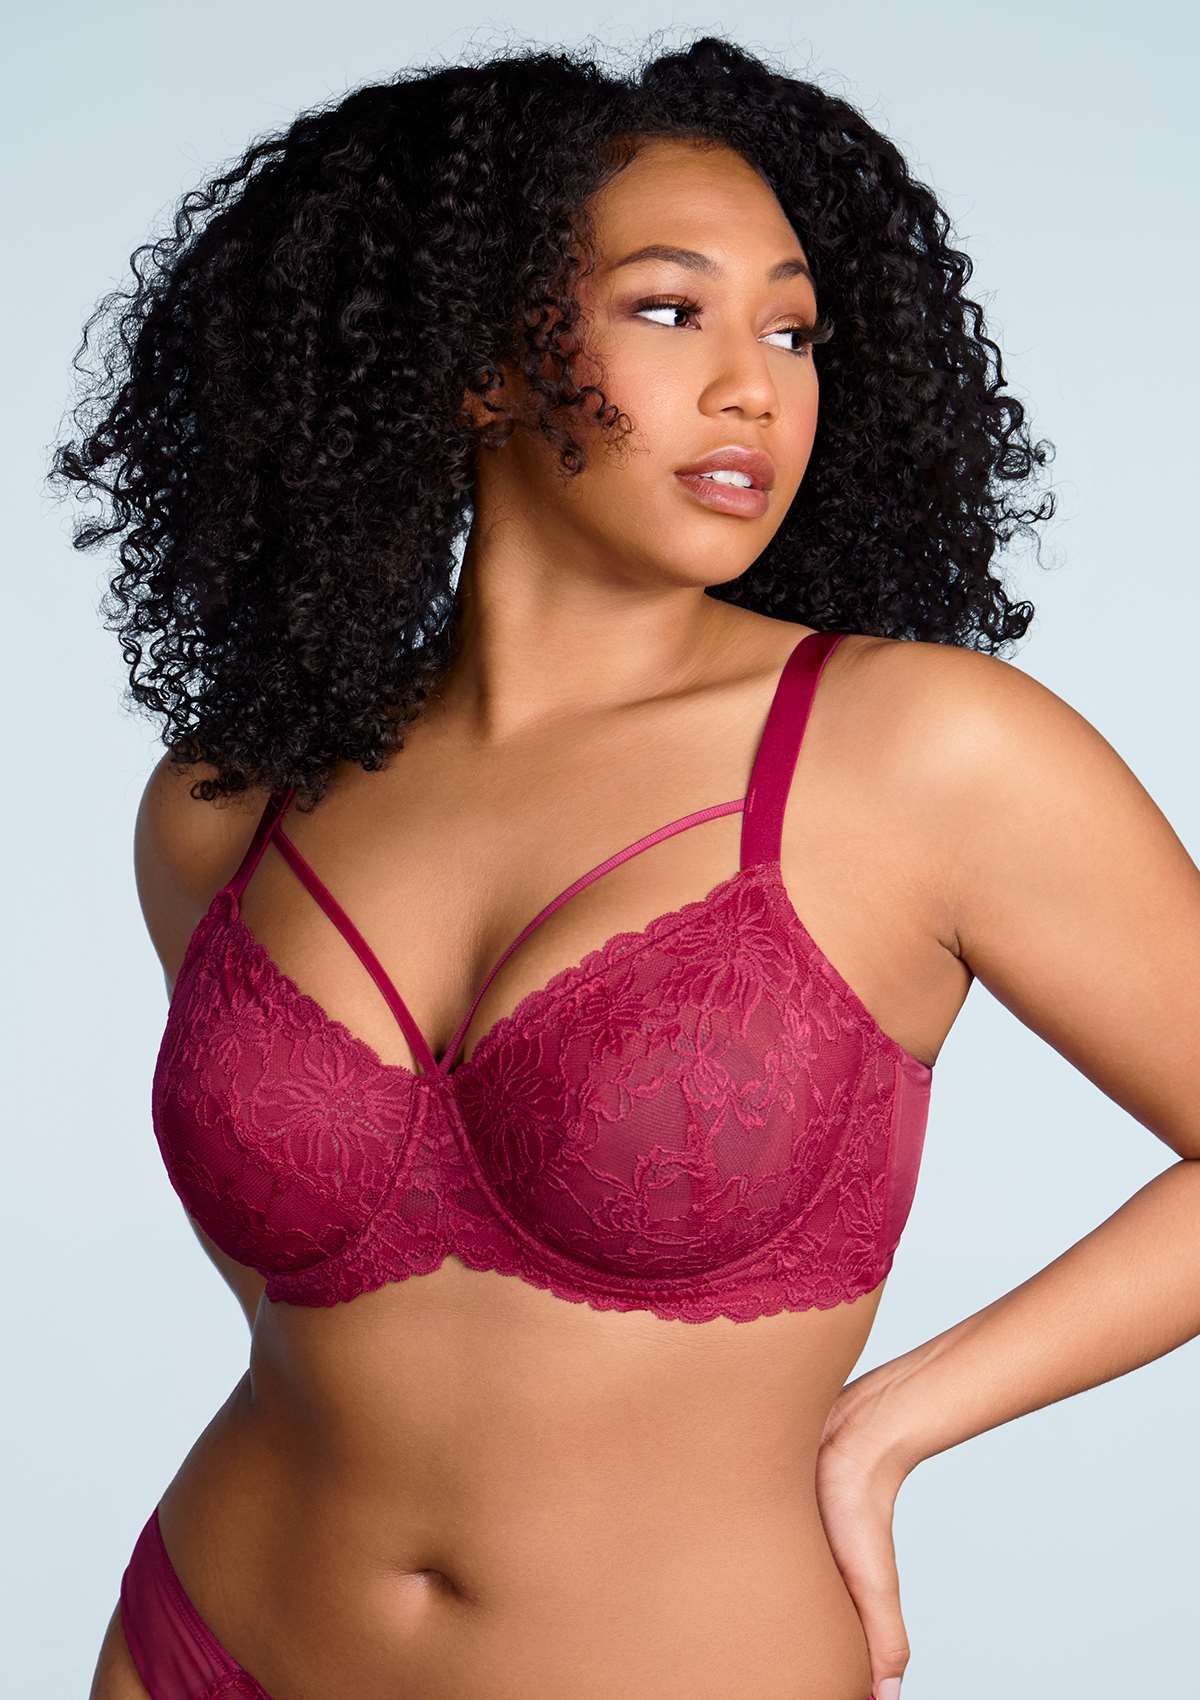 HSIA Pretty In Petals Sexy Lace Bra: Full Coverage Back Smoothing Bra - Red / 34 / G